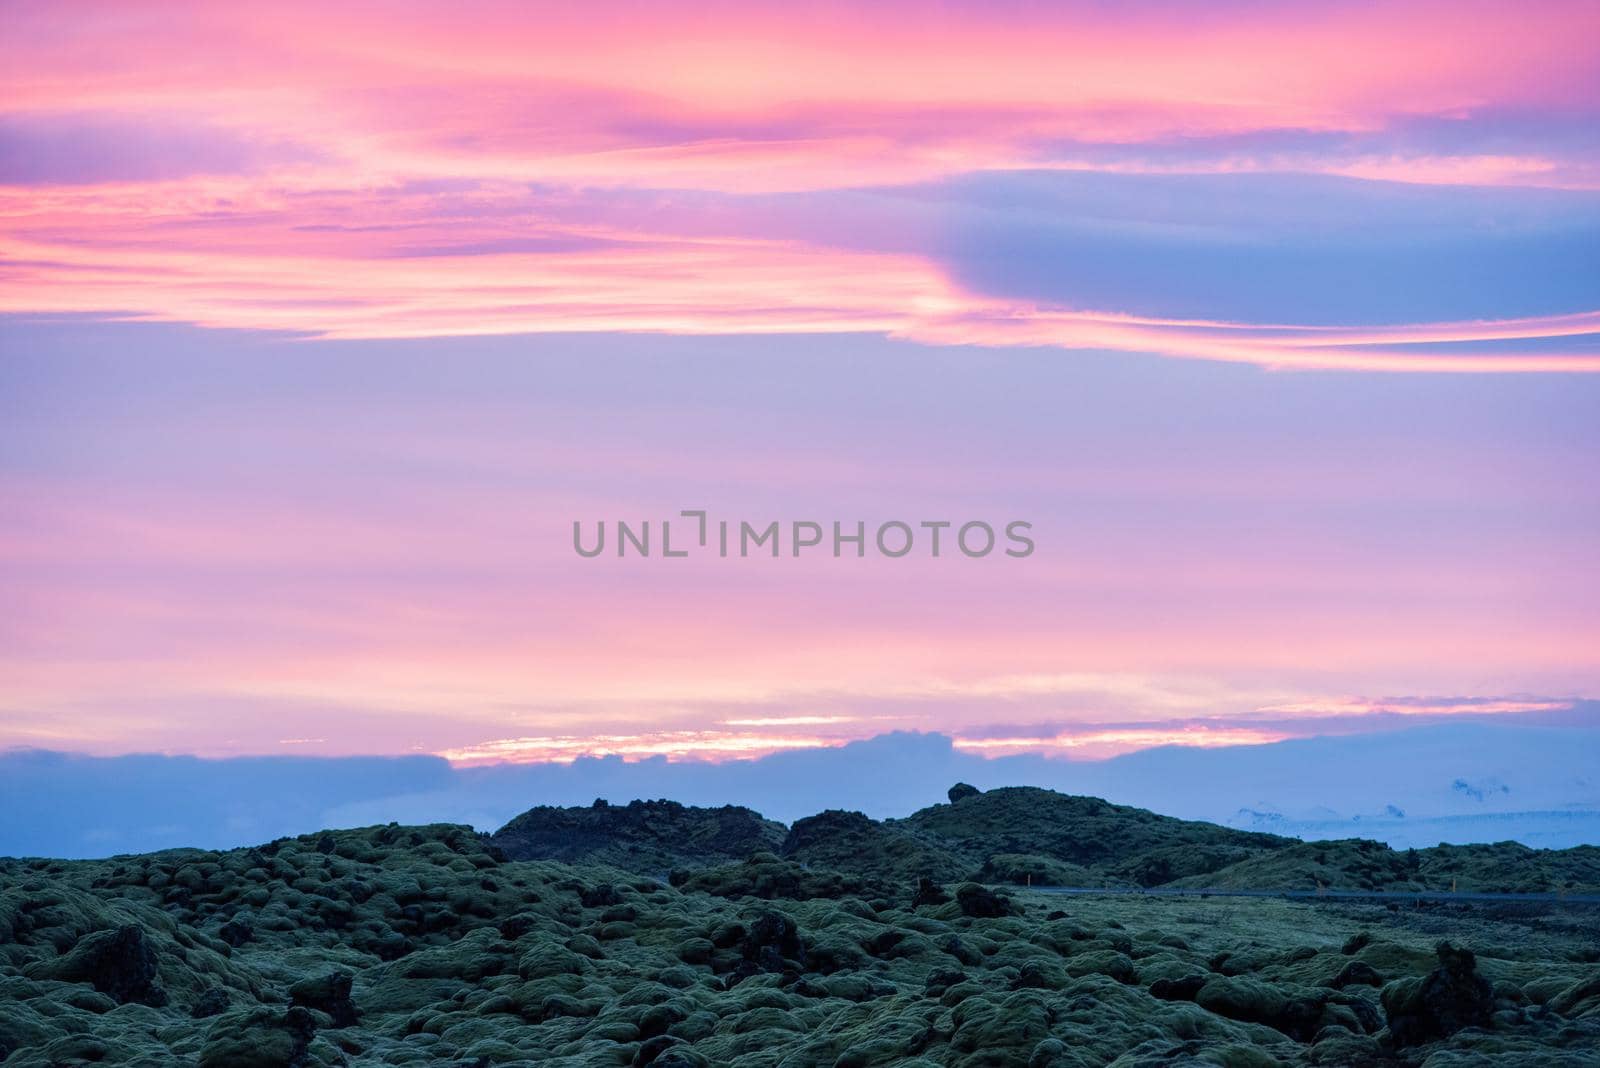 Icelandic landscape photo at sunset with volcanic rock field covered in green moss with a pretty purple and pink sky